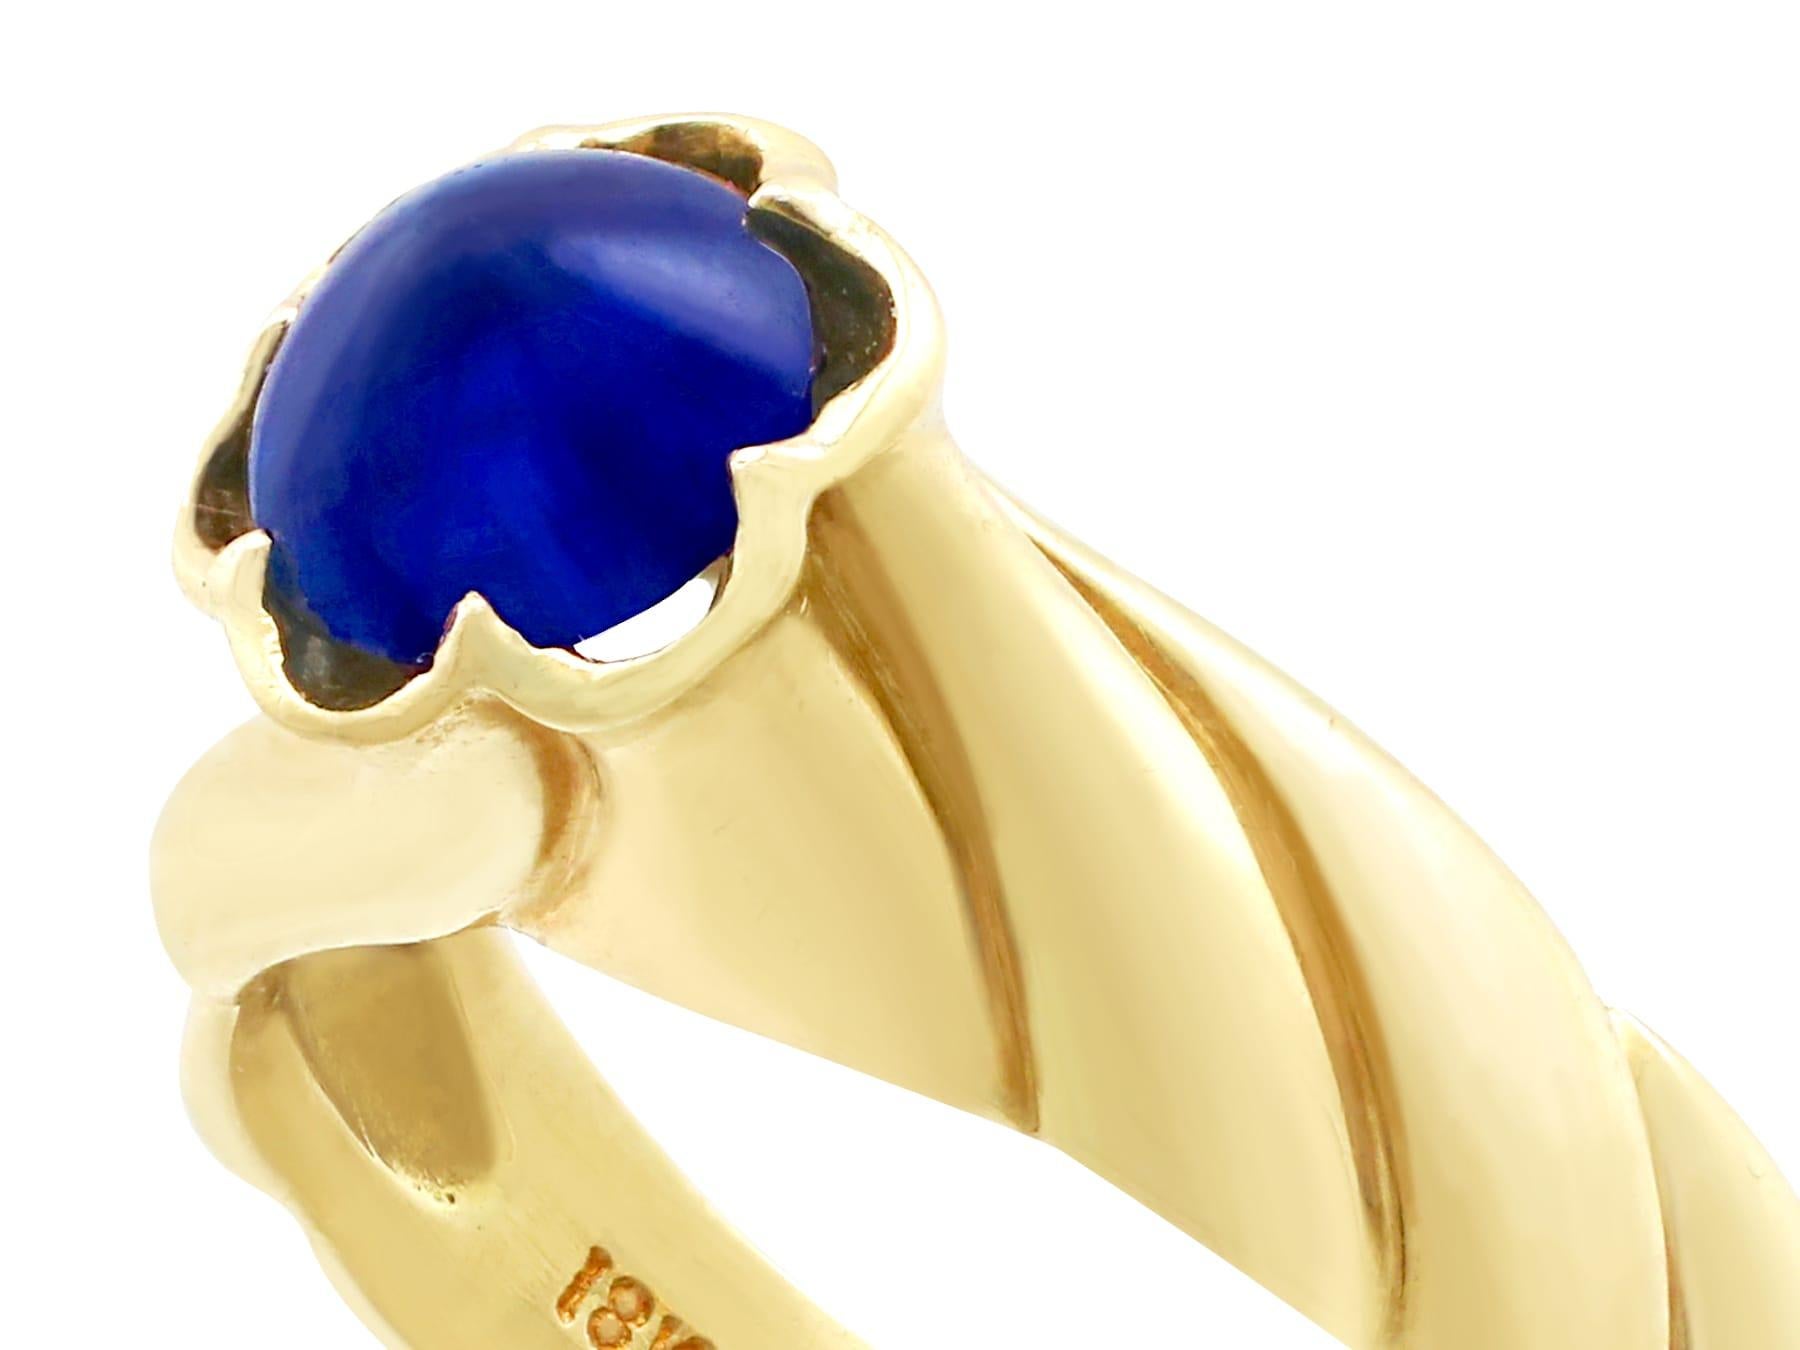 1980s 1.22 Carat Cabochon Cut Sapphire 18 K Yellow Gold Cocktail Ring In Excellent Condition For Sale In Jesmond, Newcastle Upon Tyne